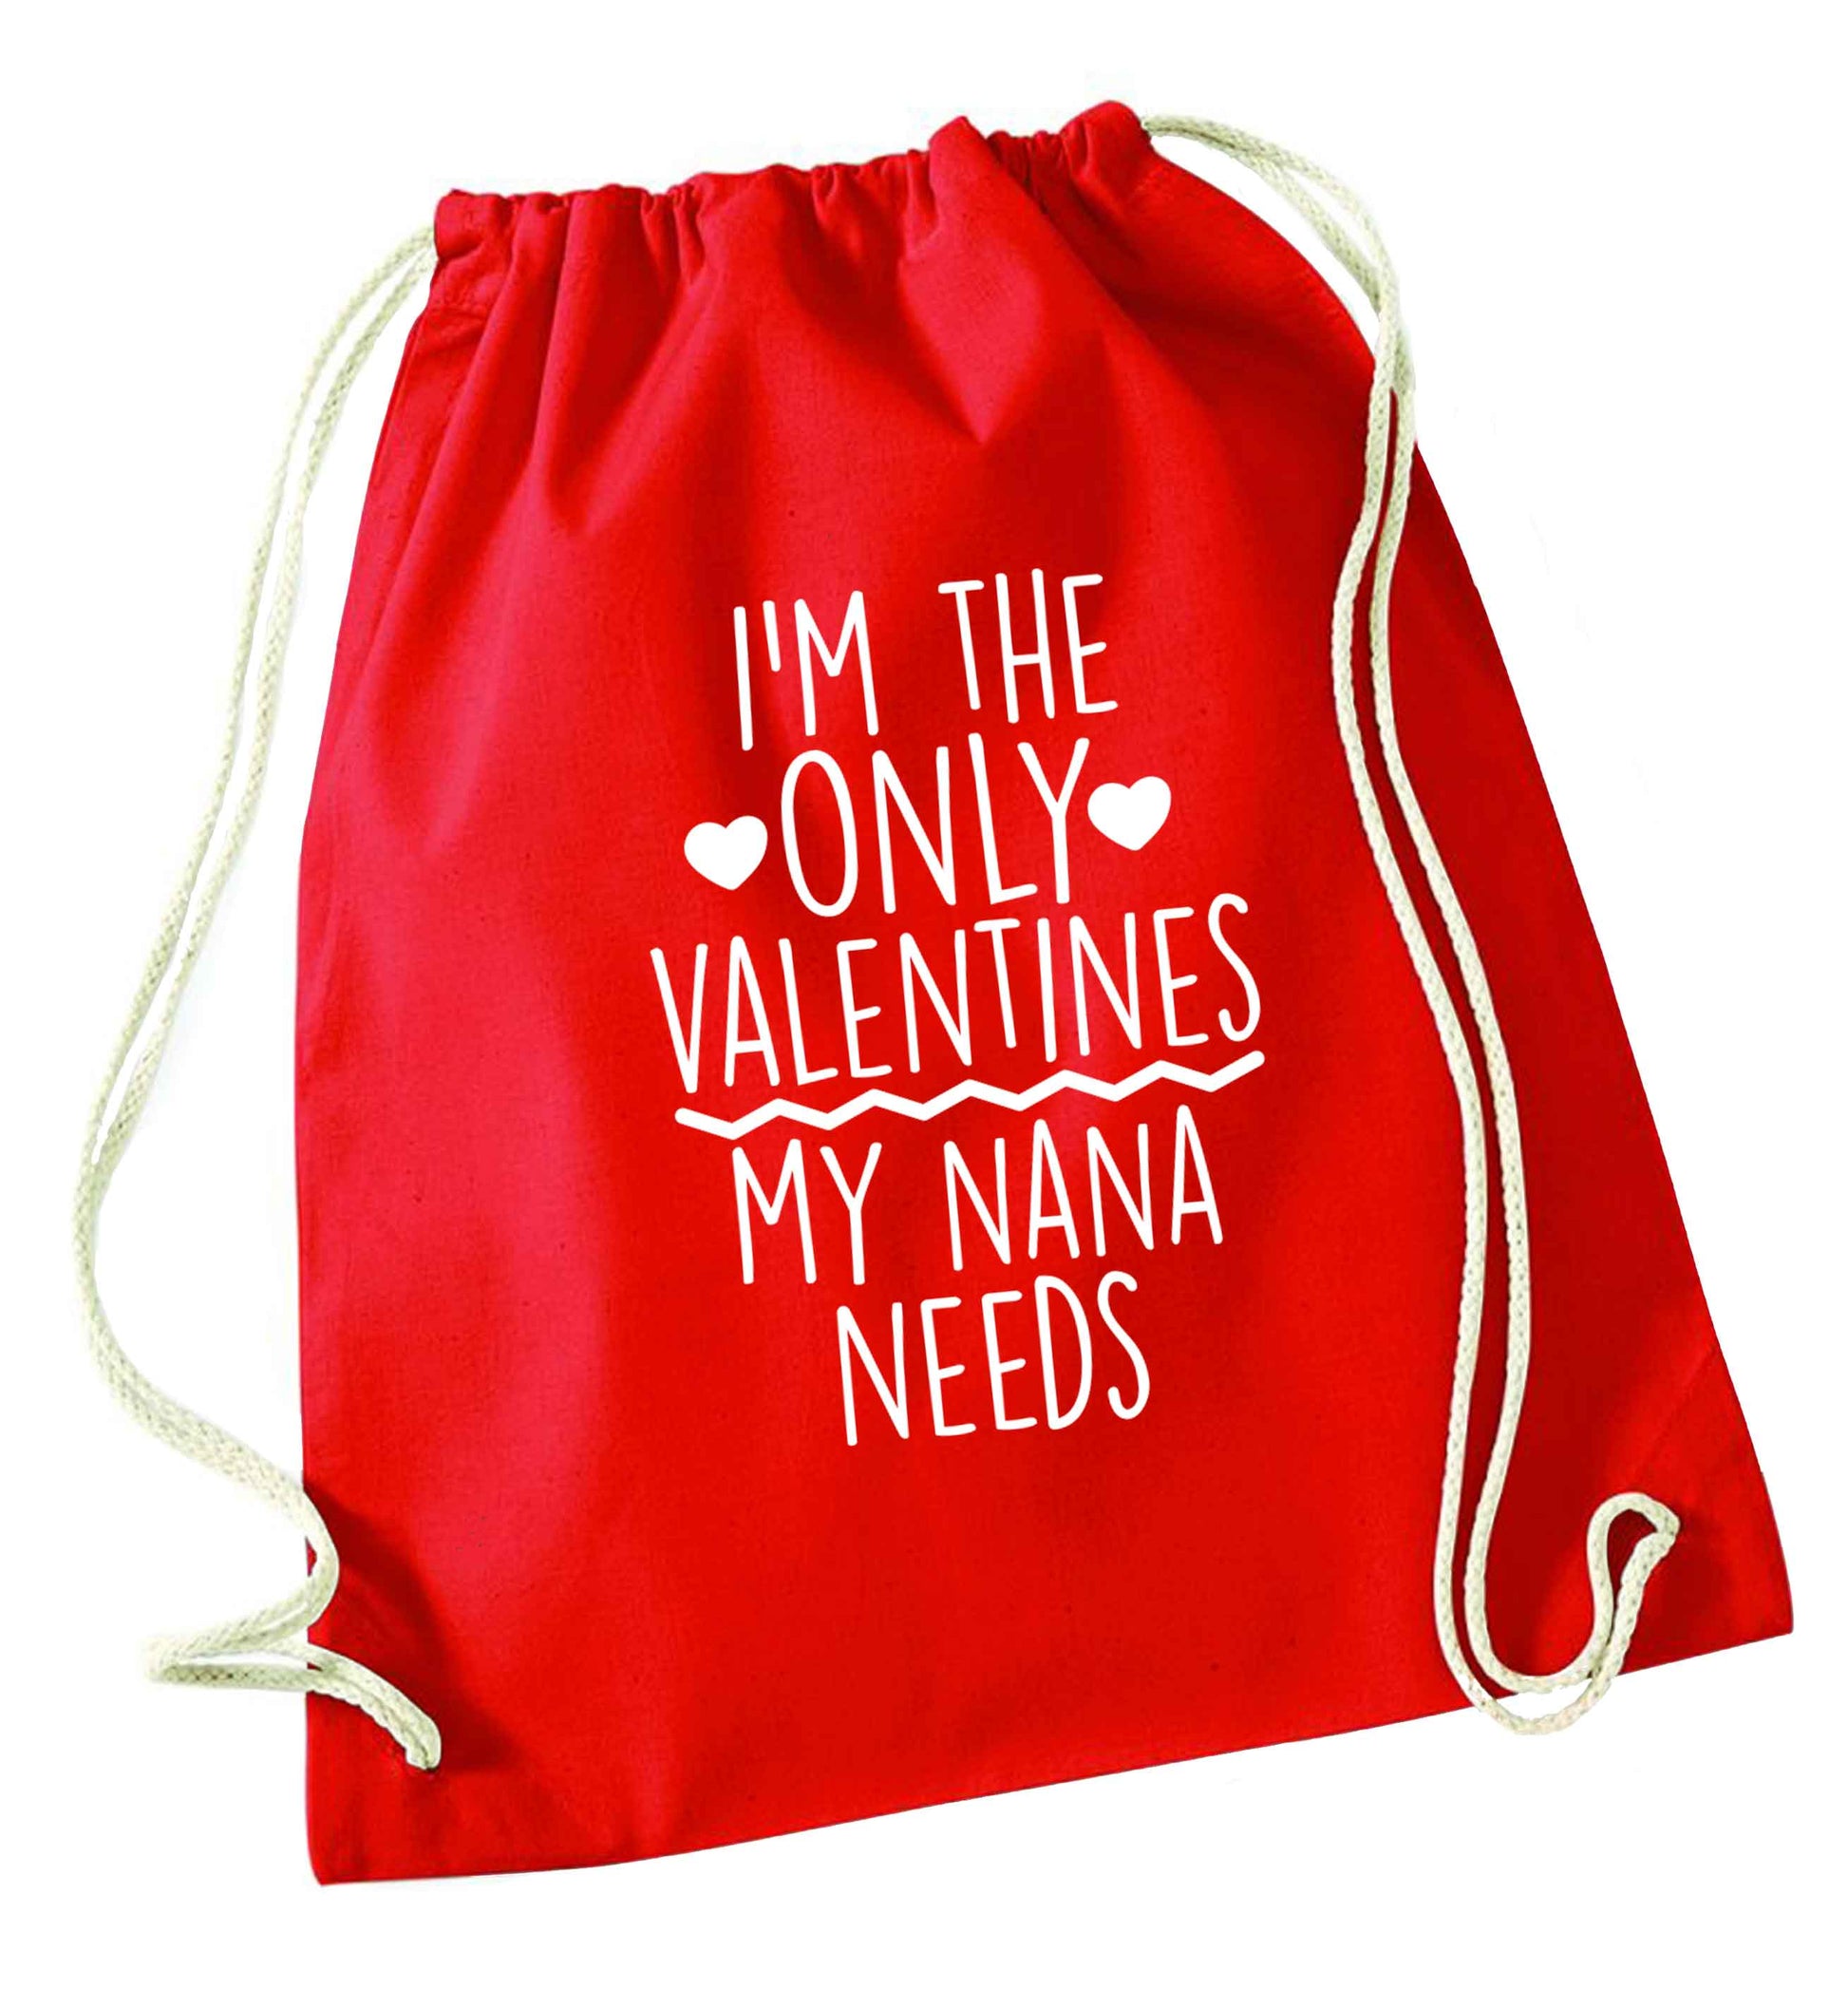 I'm the only valentines my nana needs red drawstring bag 